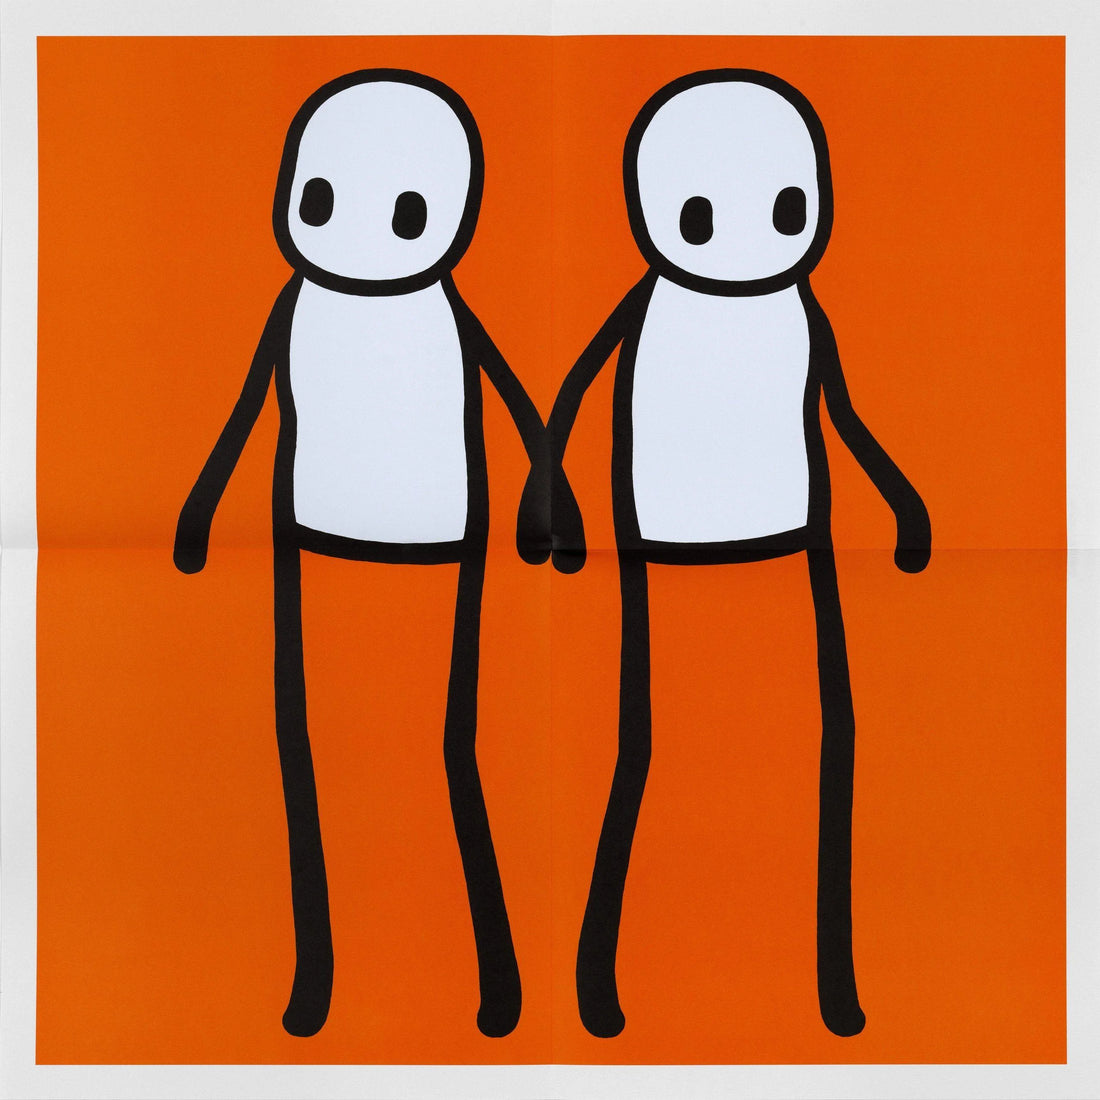 STIK's 'Holding Hands' Series: Its History and Meaning